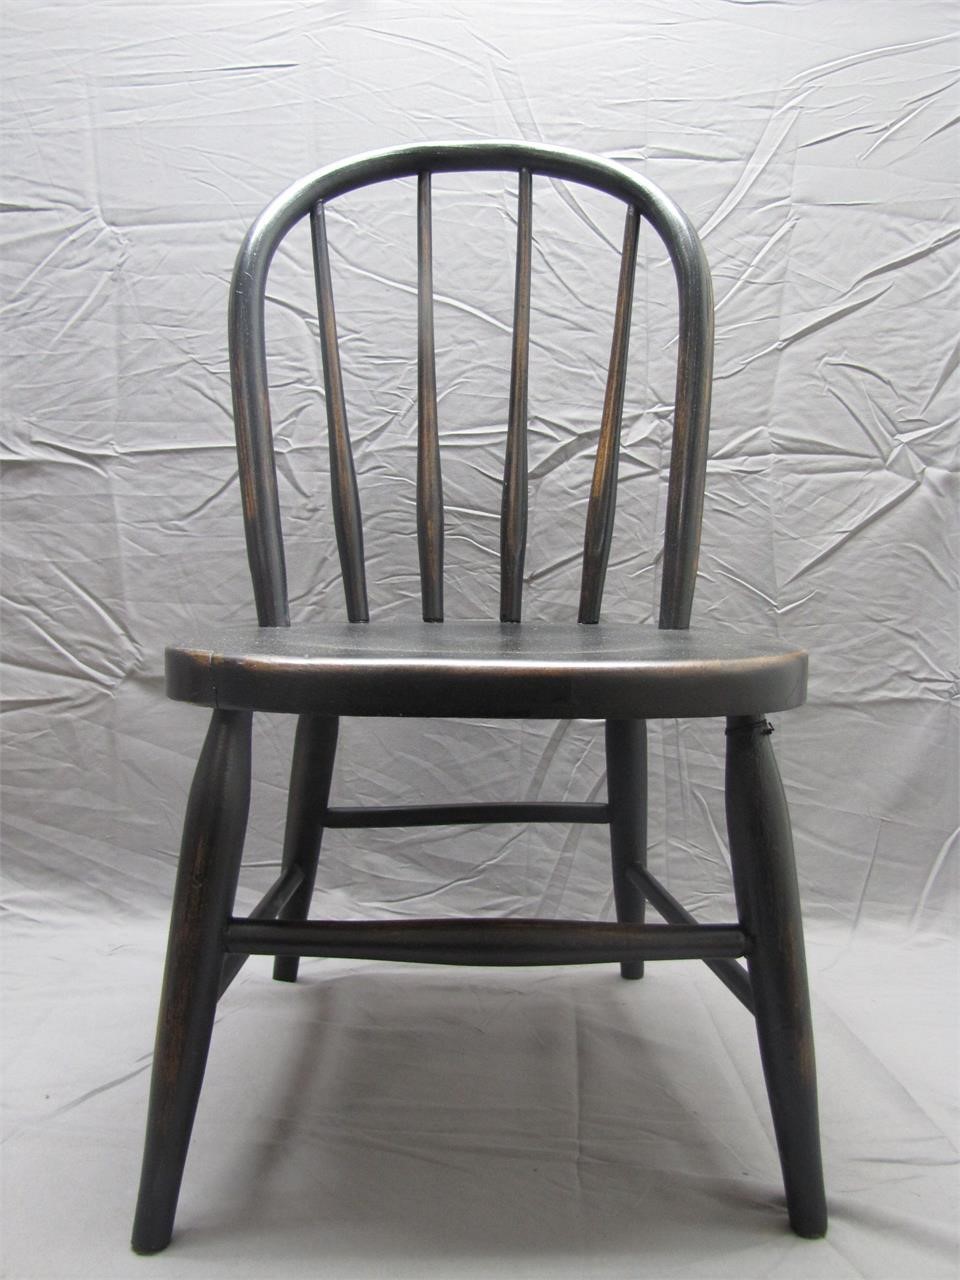 Vintage Small Black Home Wooden Chair